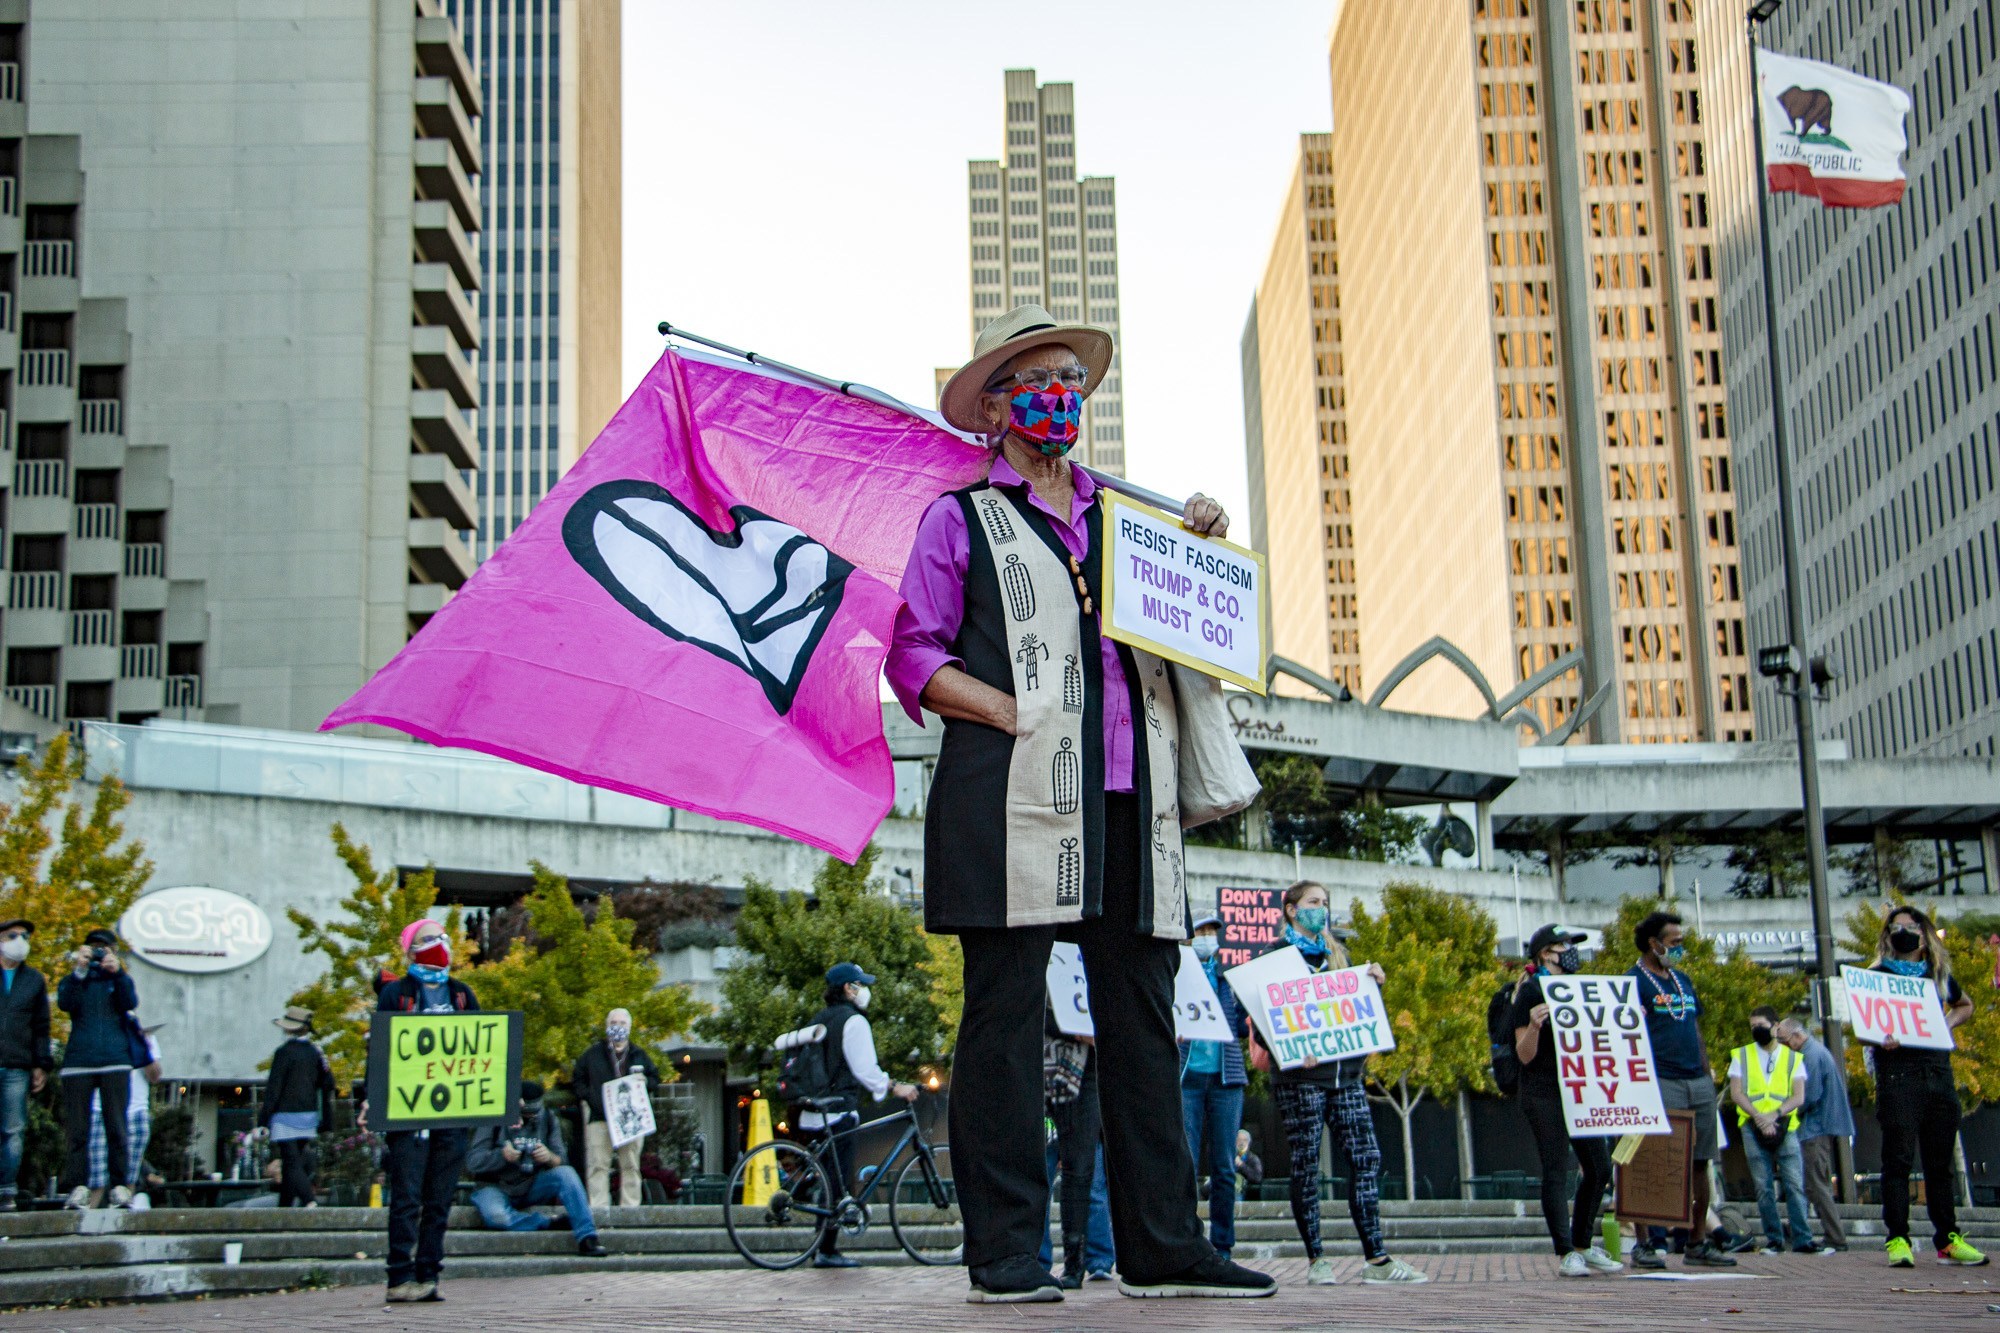 Person holding a large pink flag with a heart symbol, standing in an urban area with tall buildings. Surrounded by others holding protest signs, including 